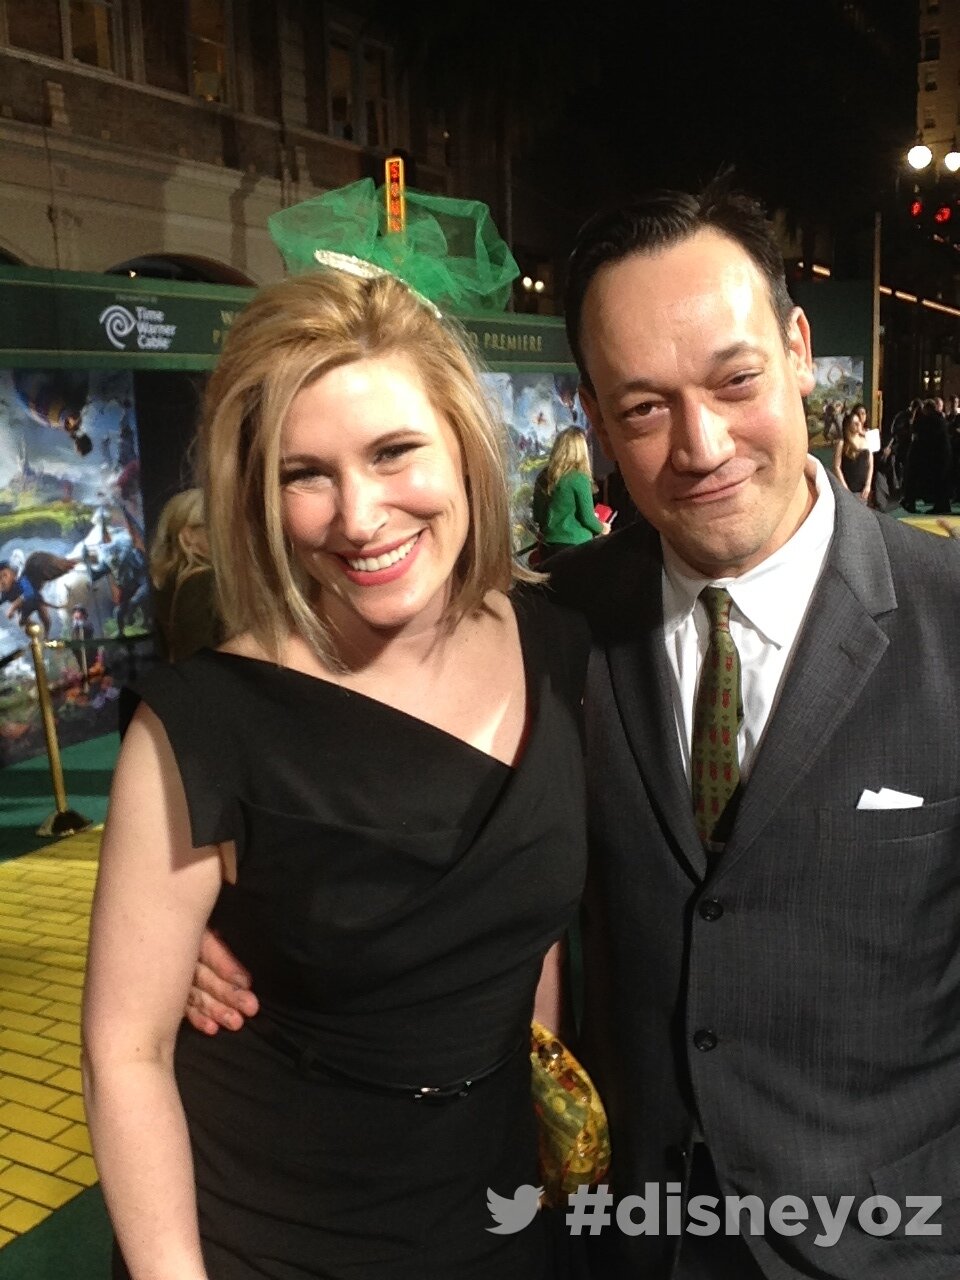 Suzanne Keilly and Ted Raimi on the red carpet at the Oz: The Great and Powerful Premiere